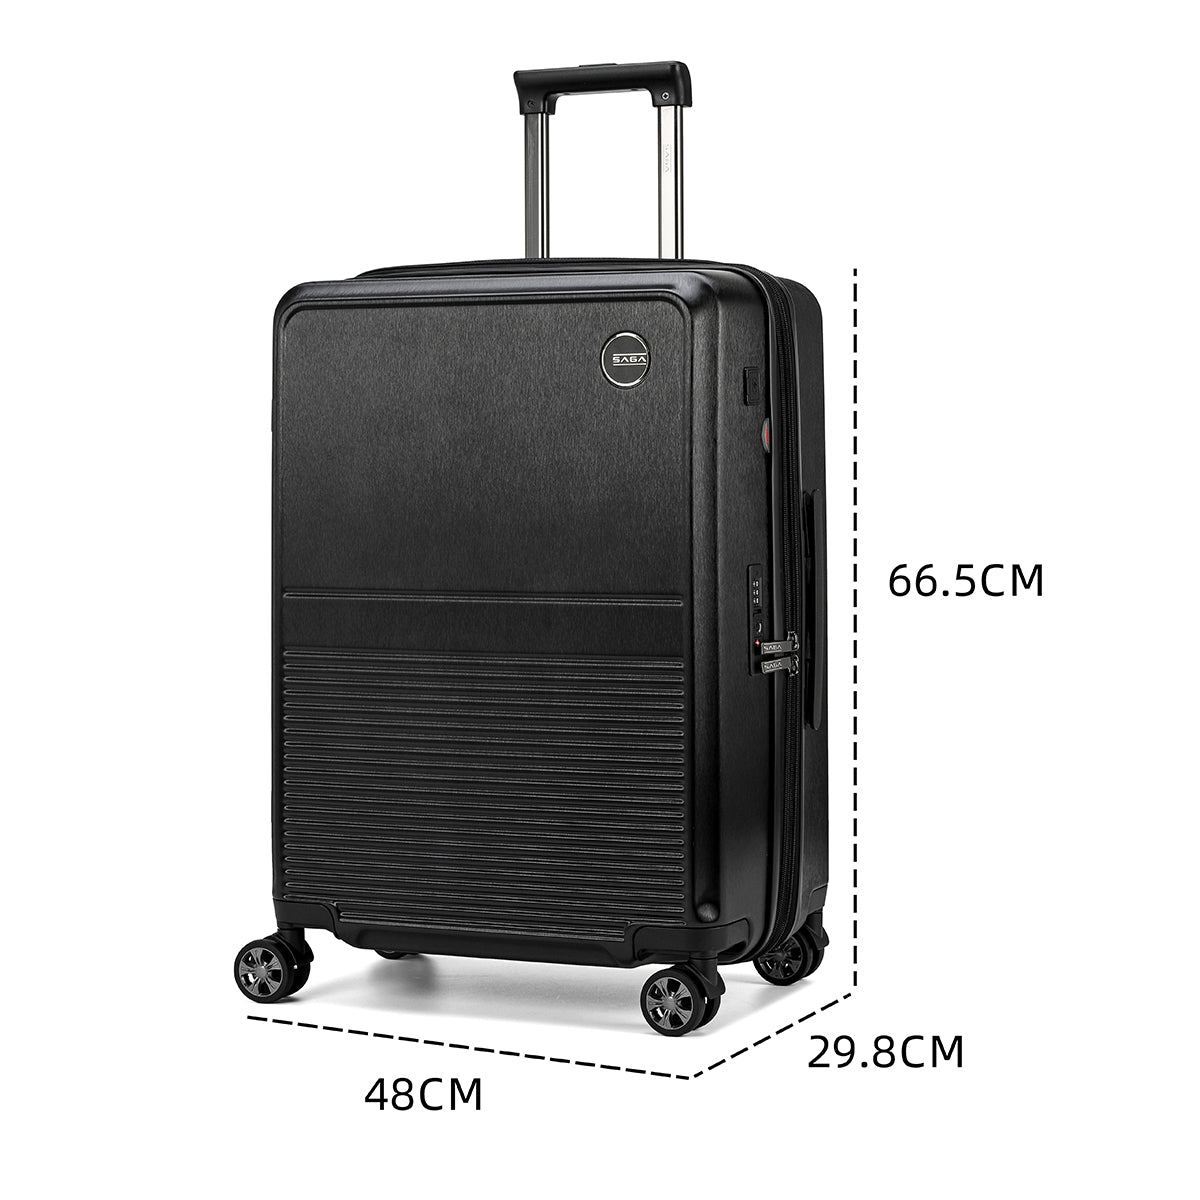 Modern and durable polycarbonate travel bags in several sizes and colors